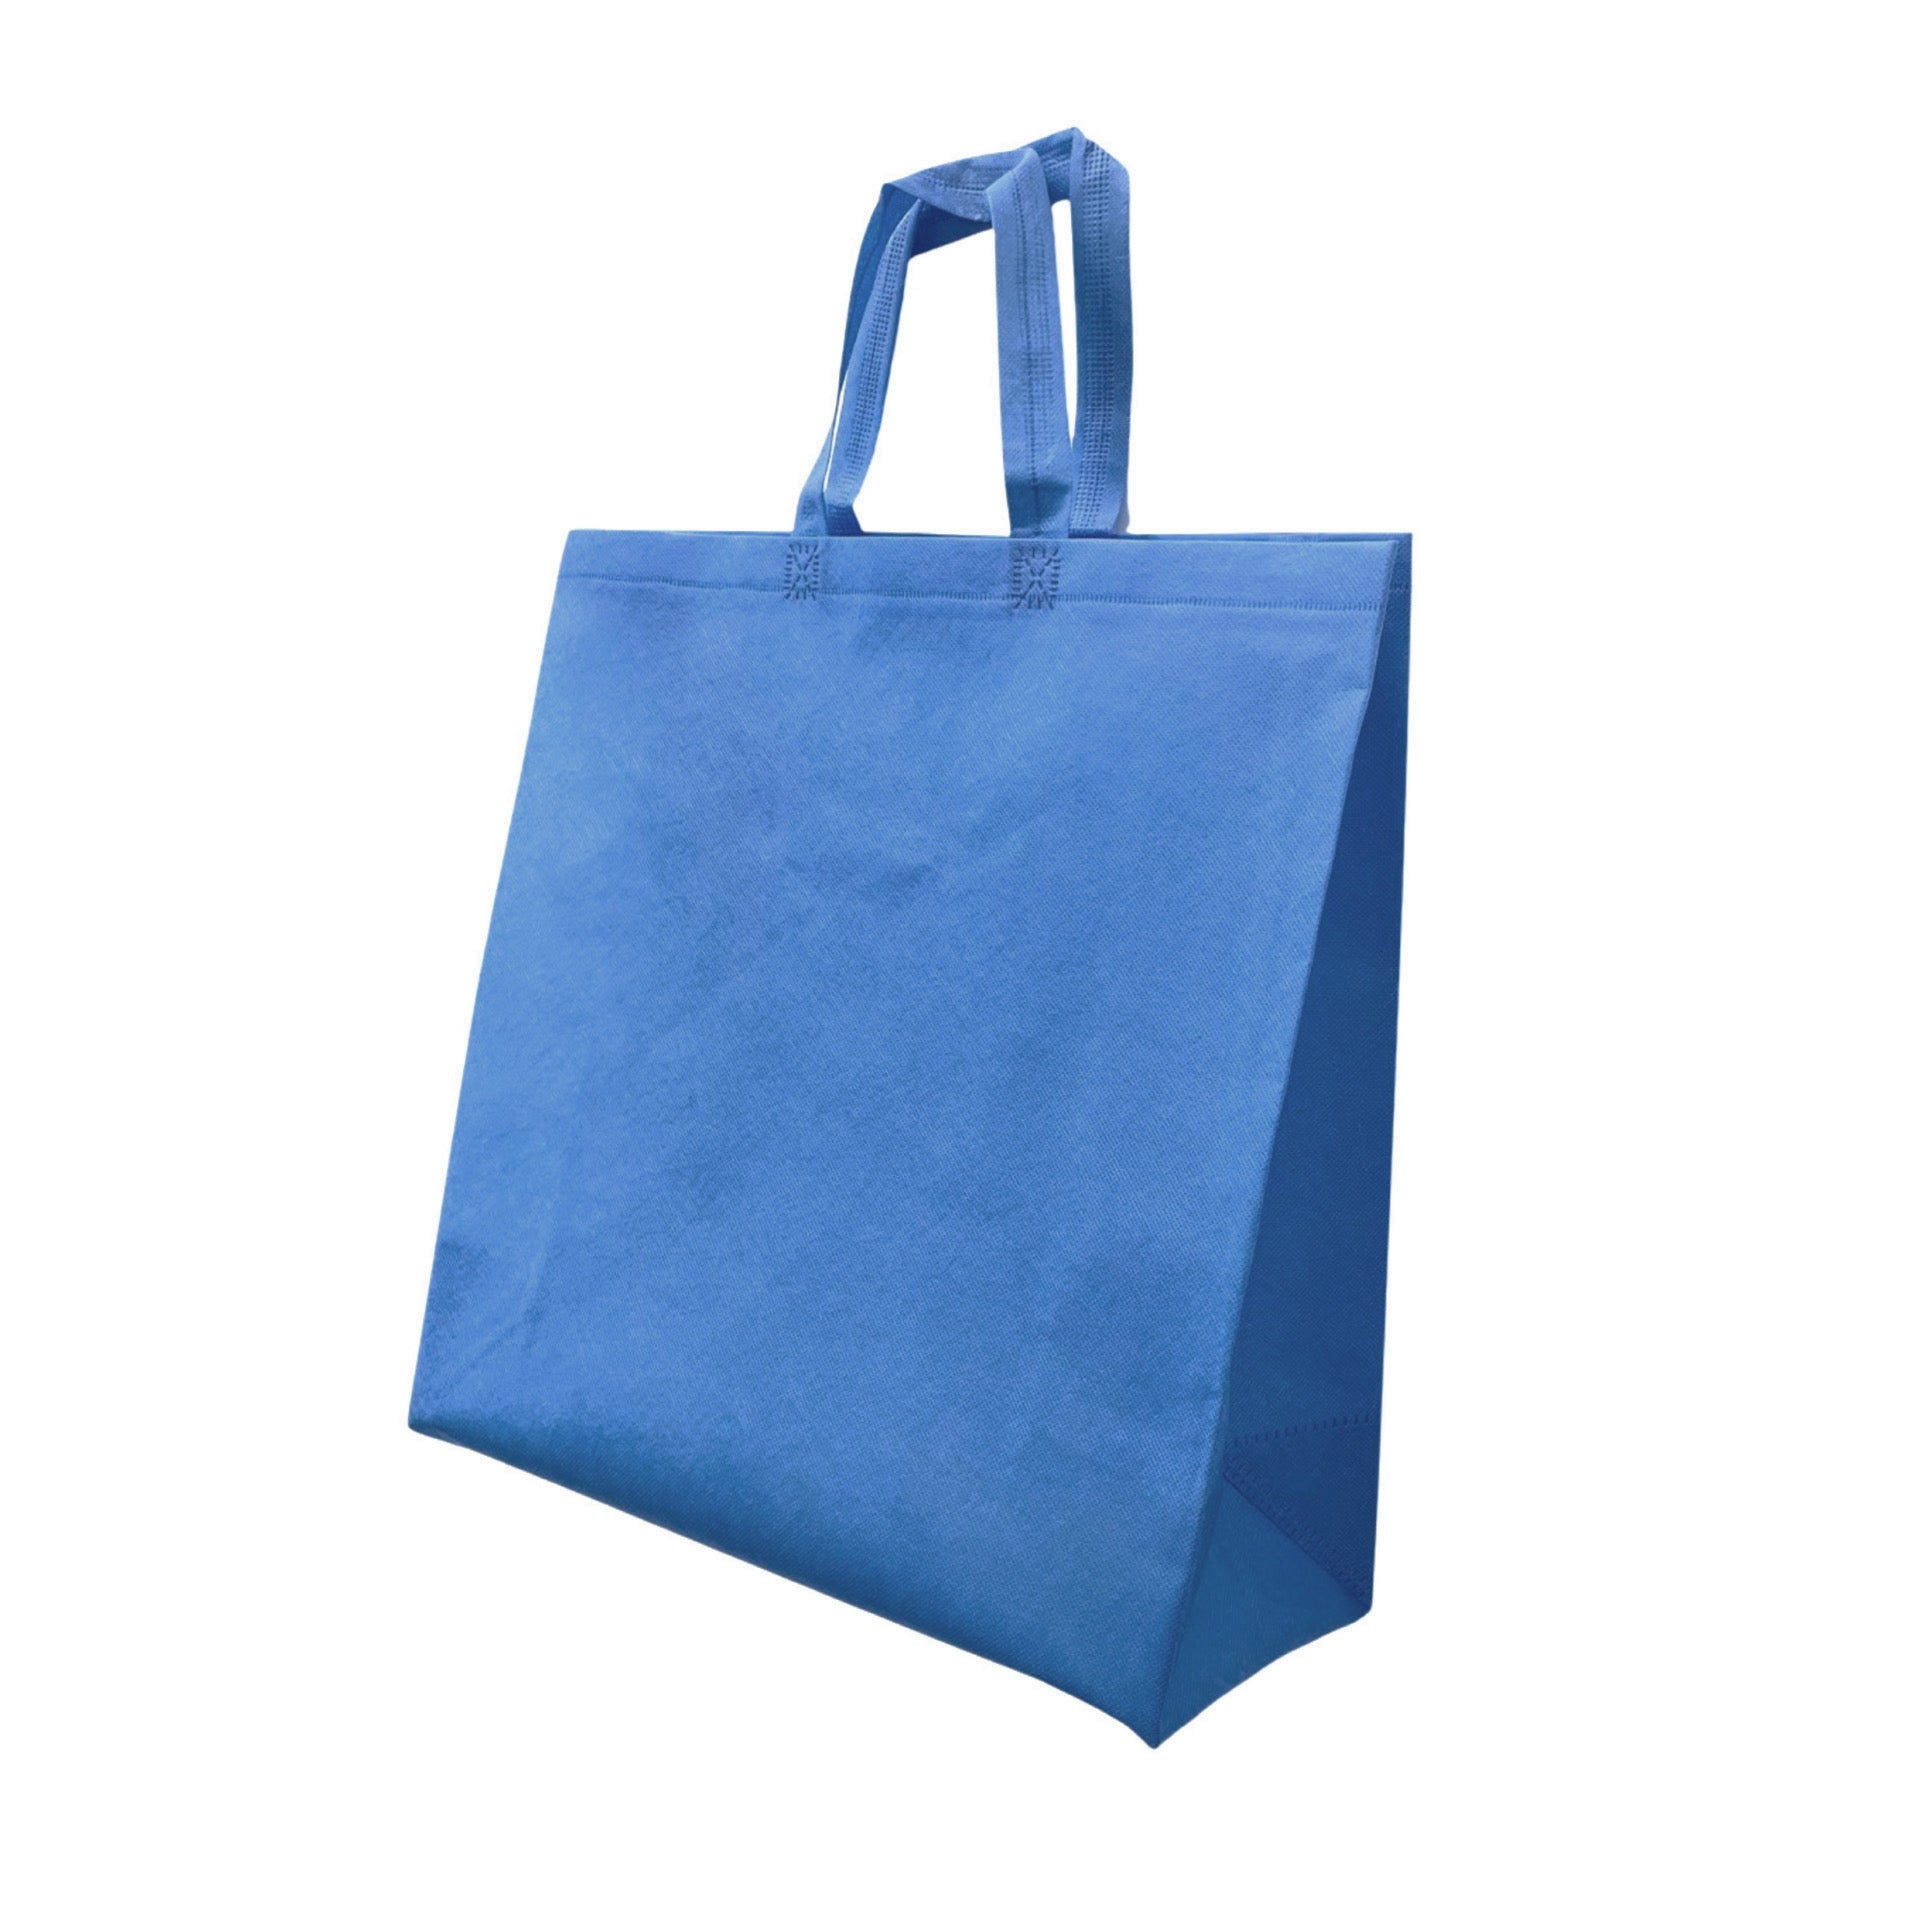 200pcs, Grocer, 15.5x6x15.5 inches, Blue Non-Woven Reusable shopping Bags, with Flat handle